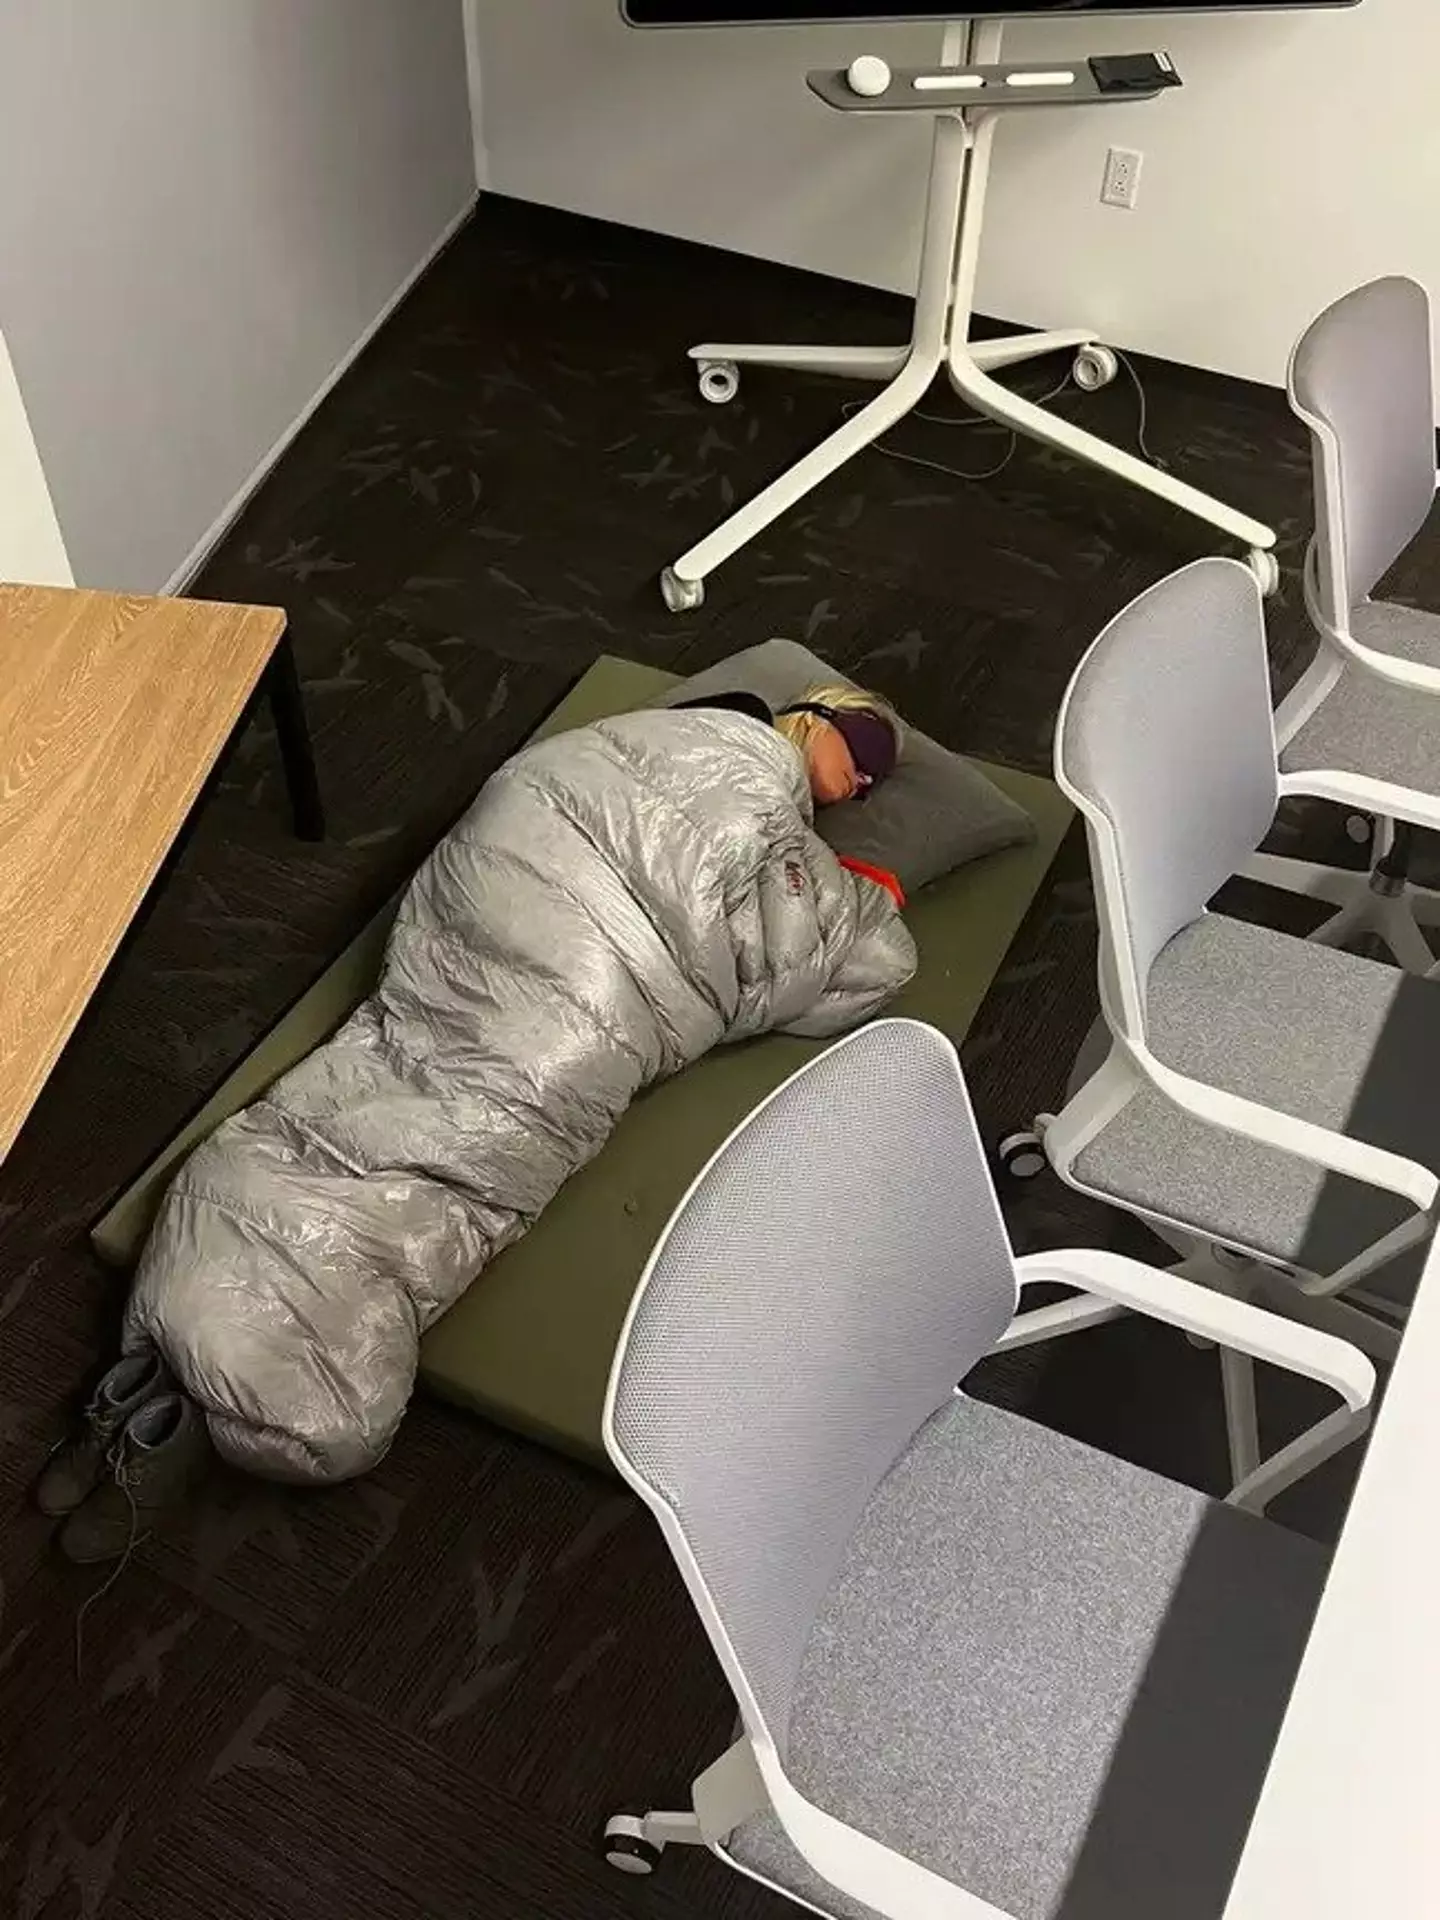 The Twitter employee who went viral for sleeping on the office floor has spoken out after being laid off.